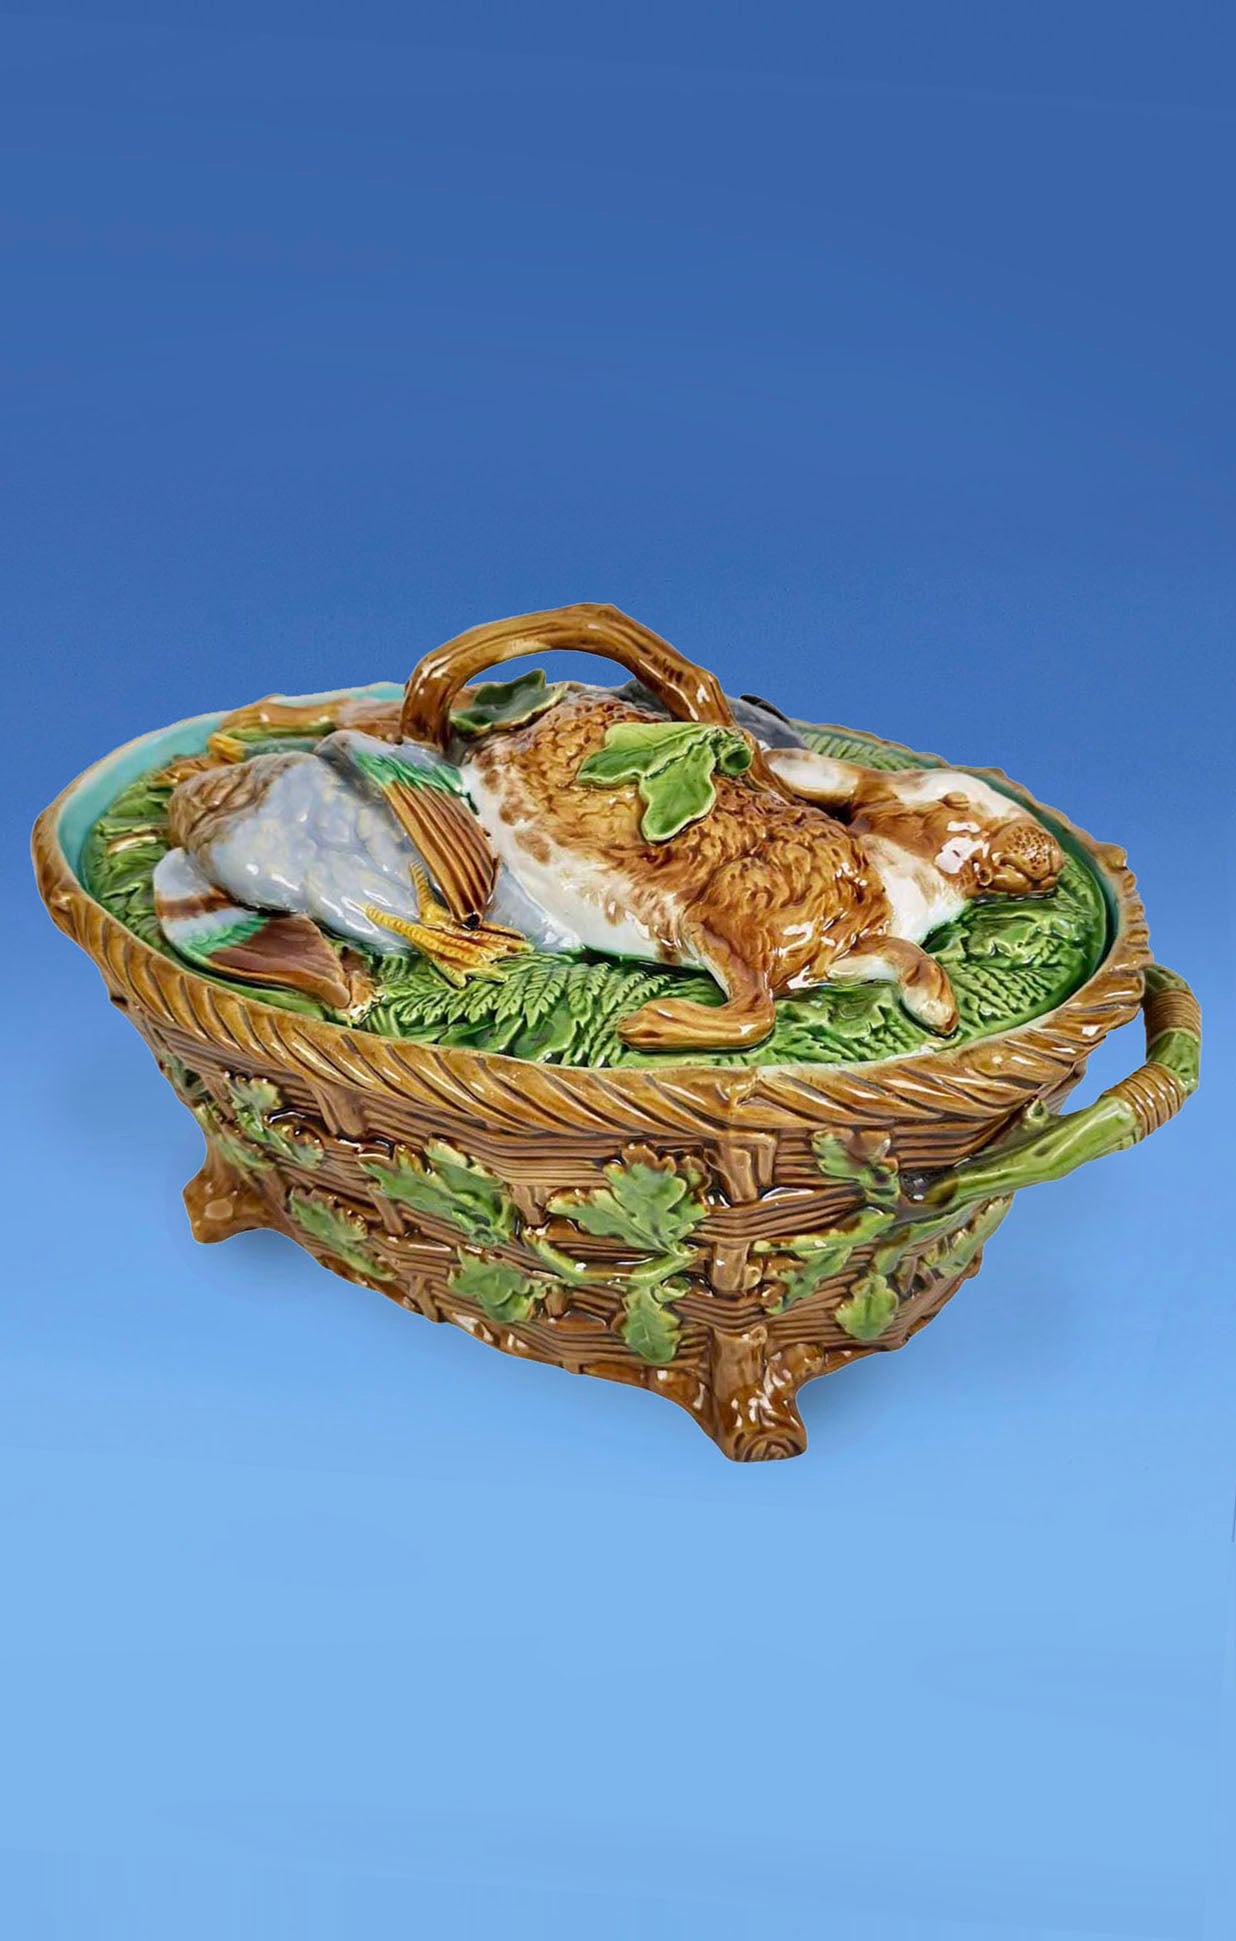 Minton Majolica Hare and Duck Game Tureen c.1870